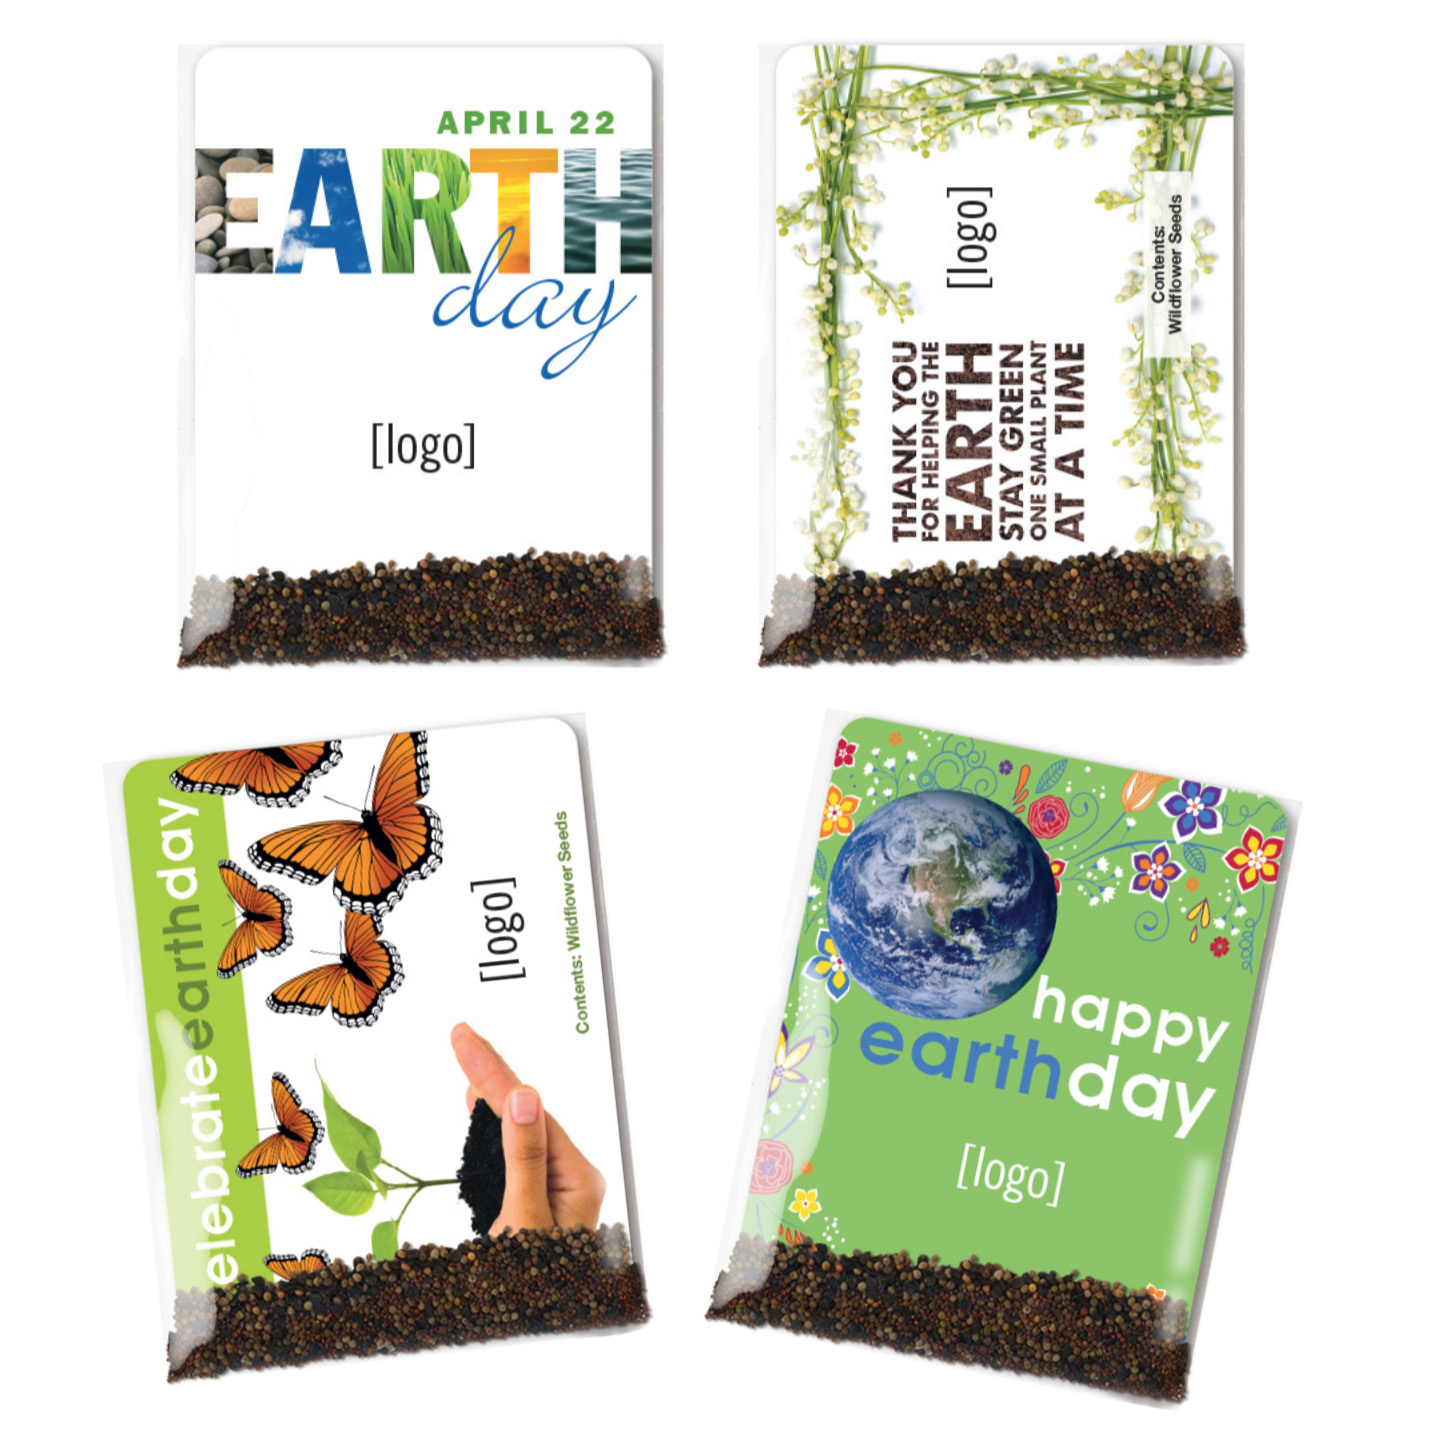 recycled seed packets for pollinators